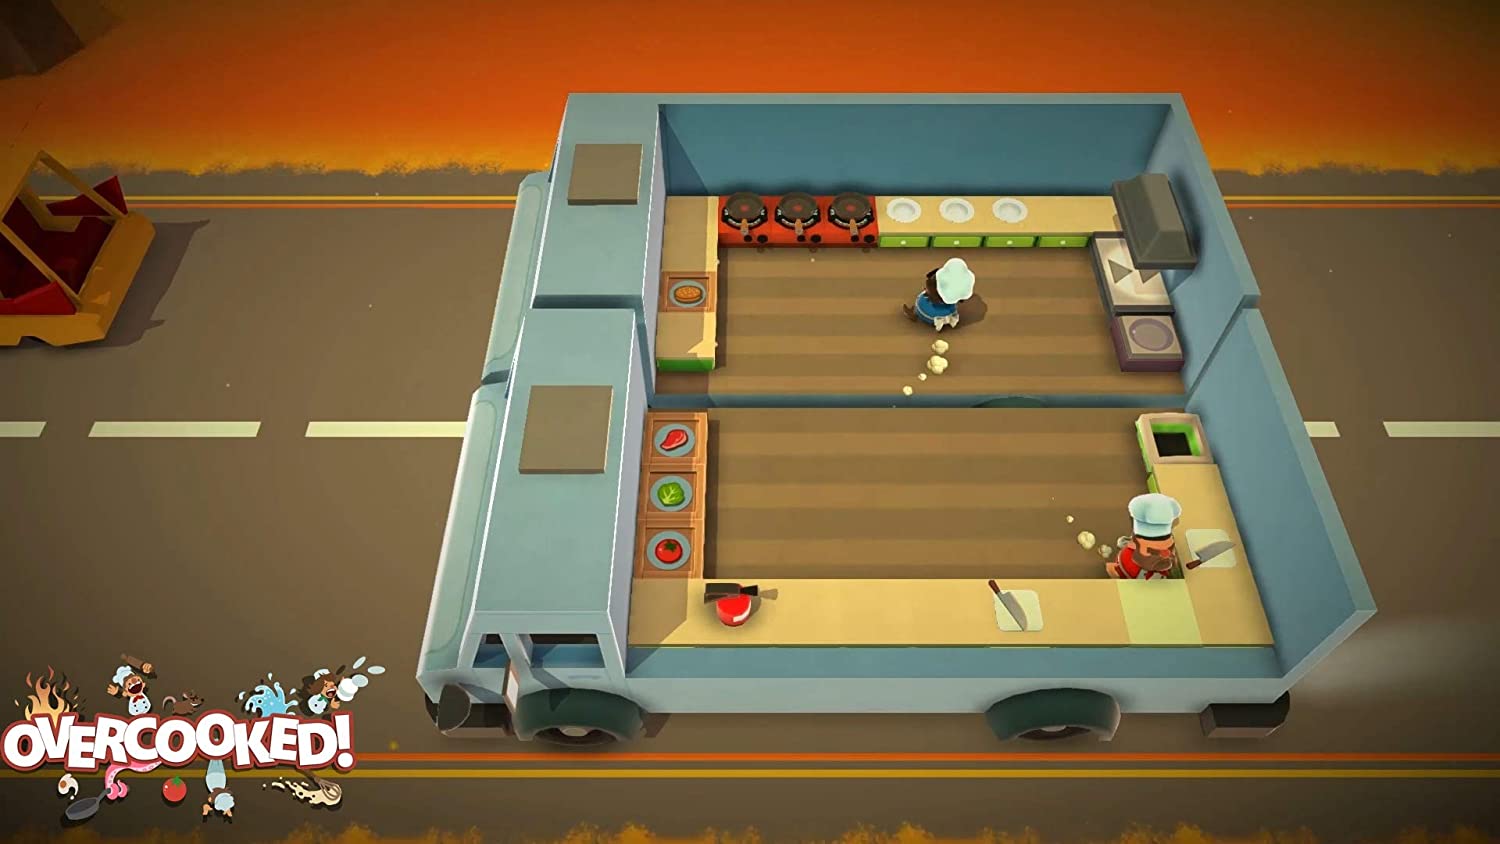 Overcooked All You Can Eat (PS5)